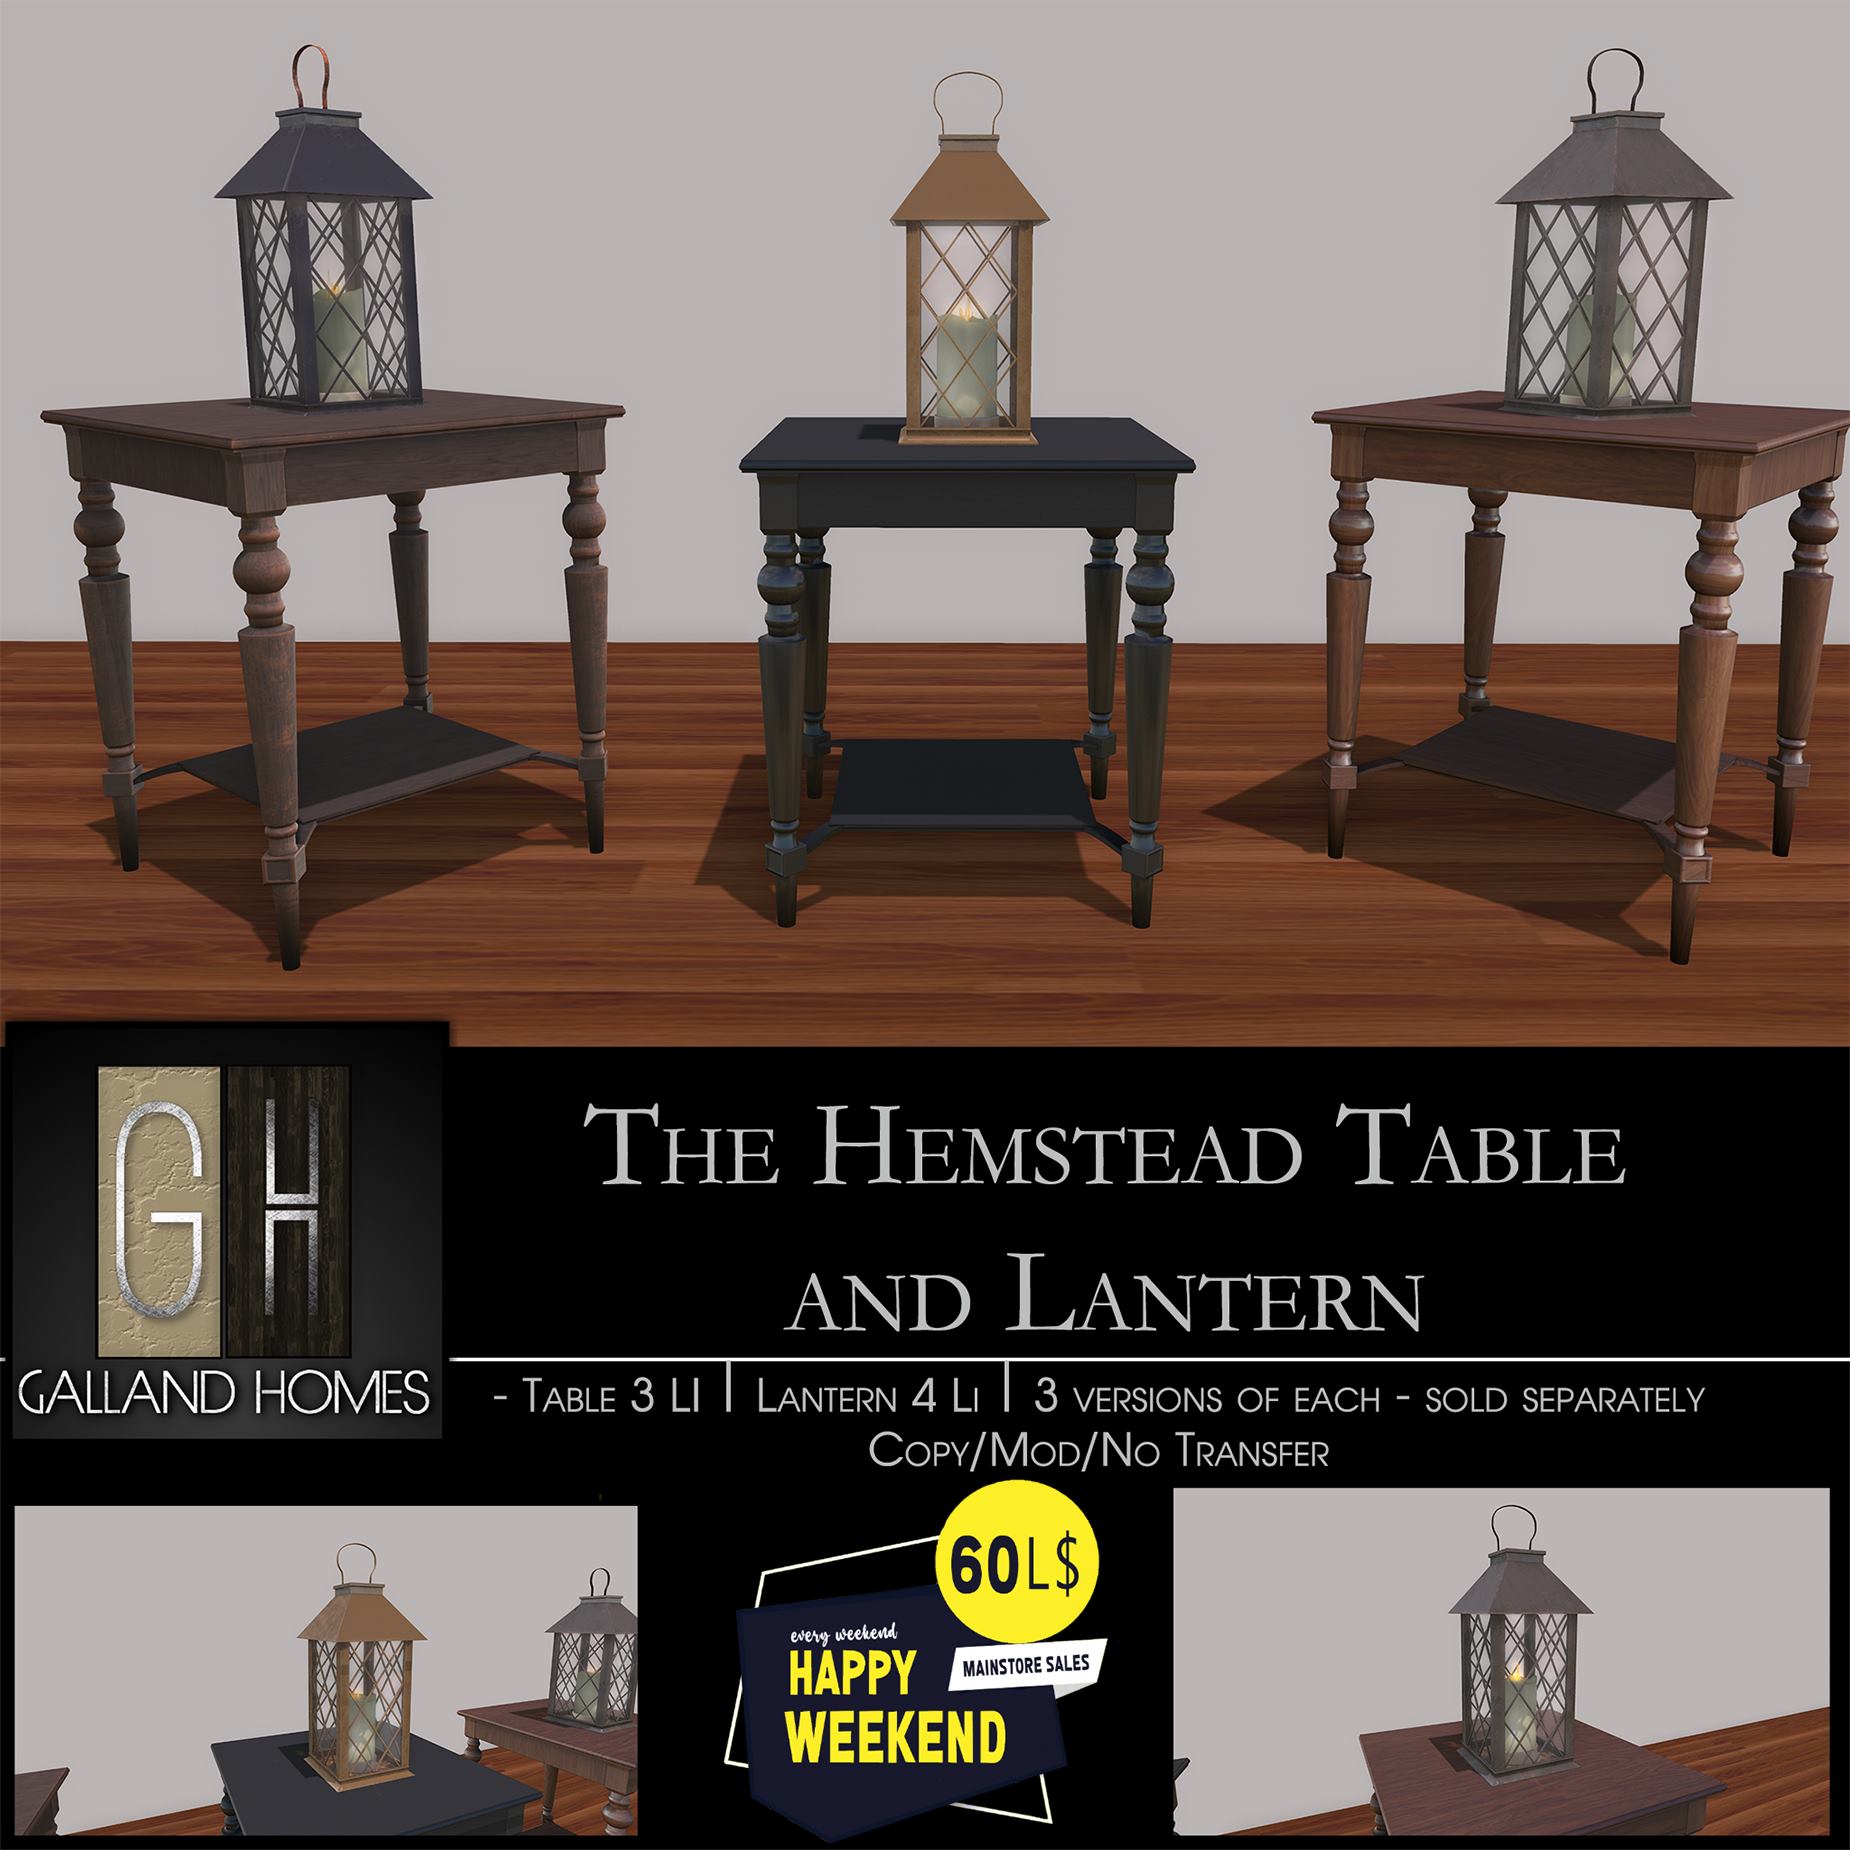 Galland Homes – The Hemstead Table And Lantern